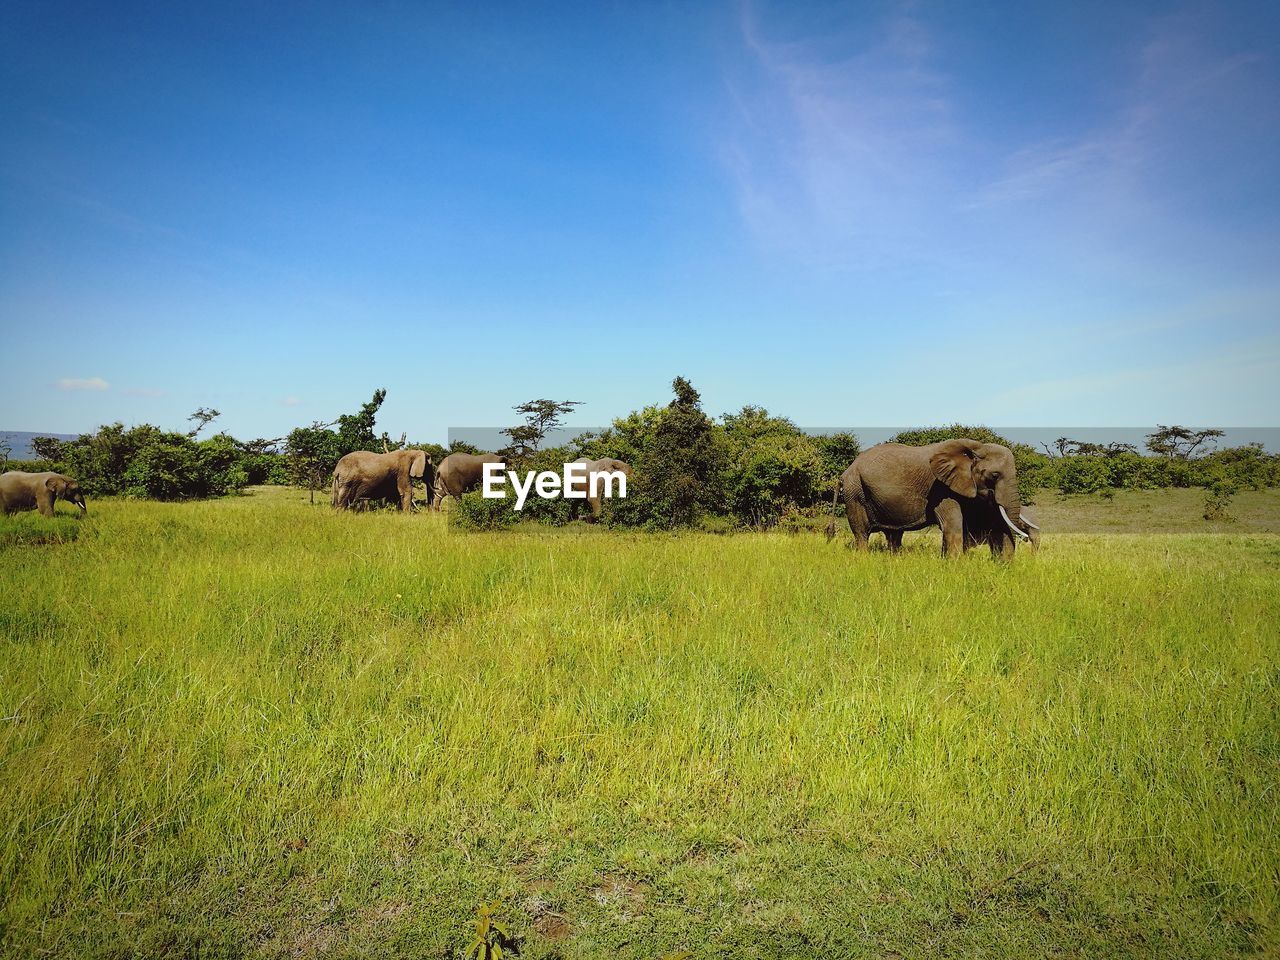 View of a group of elephants on grassy field in maasai mara against blue sky